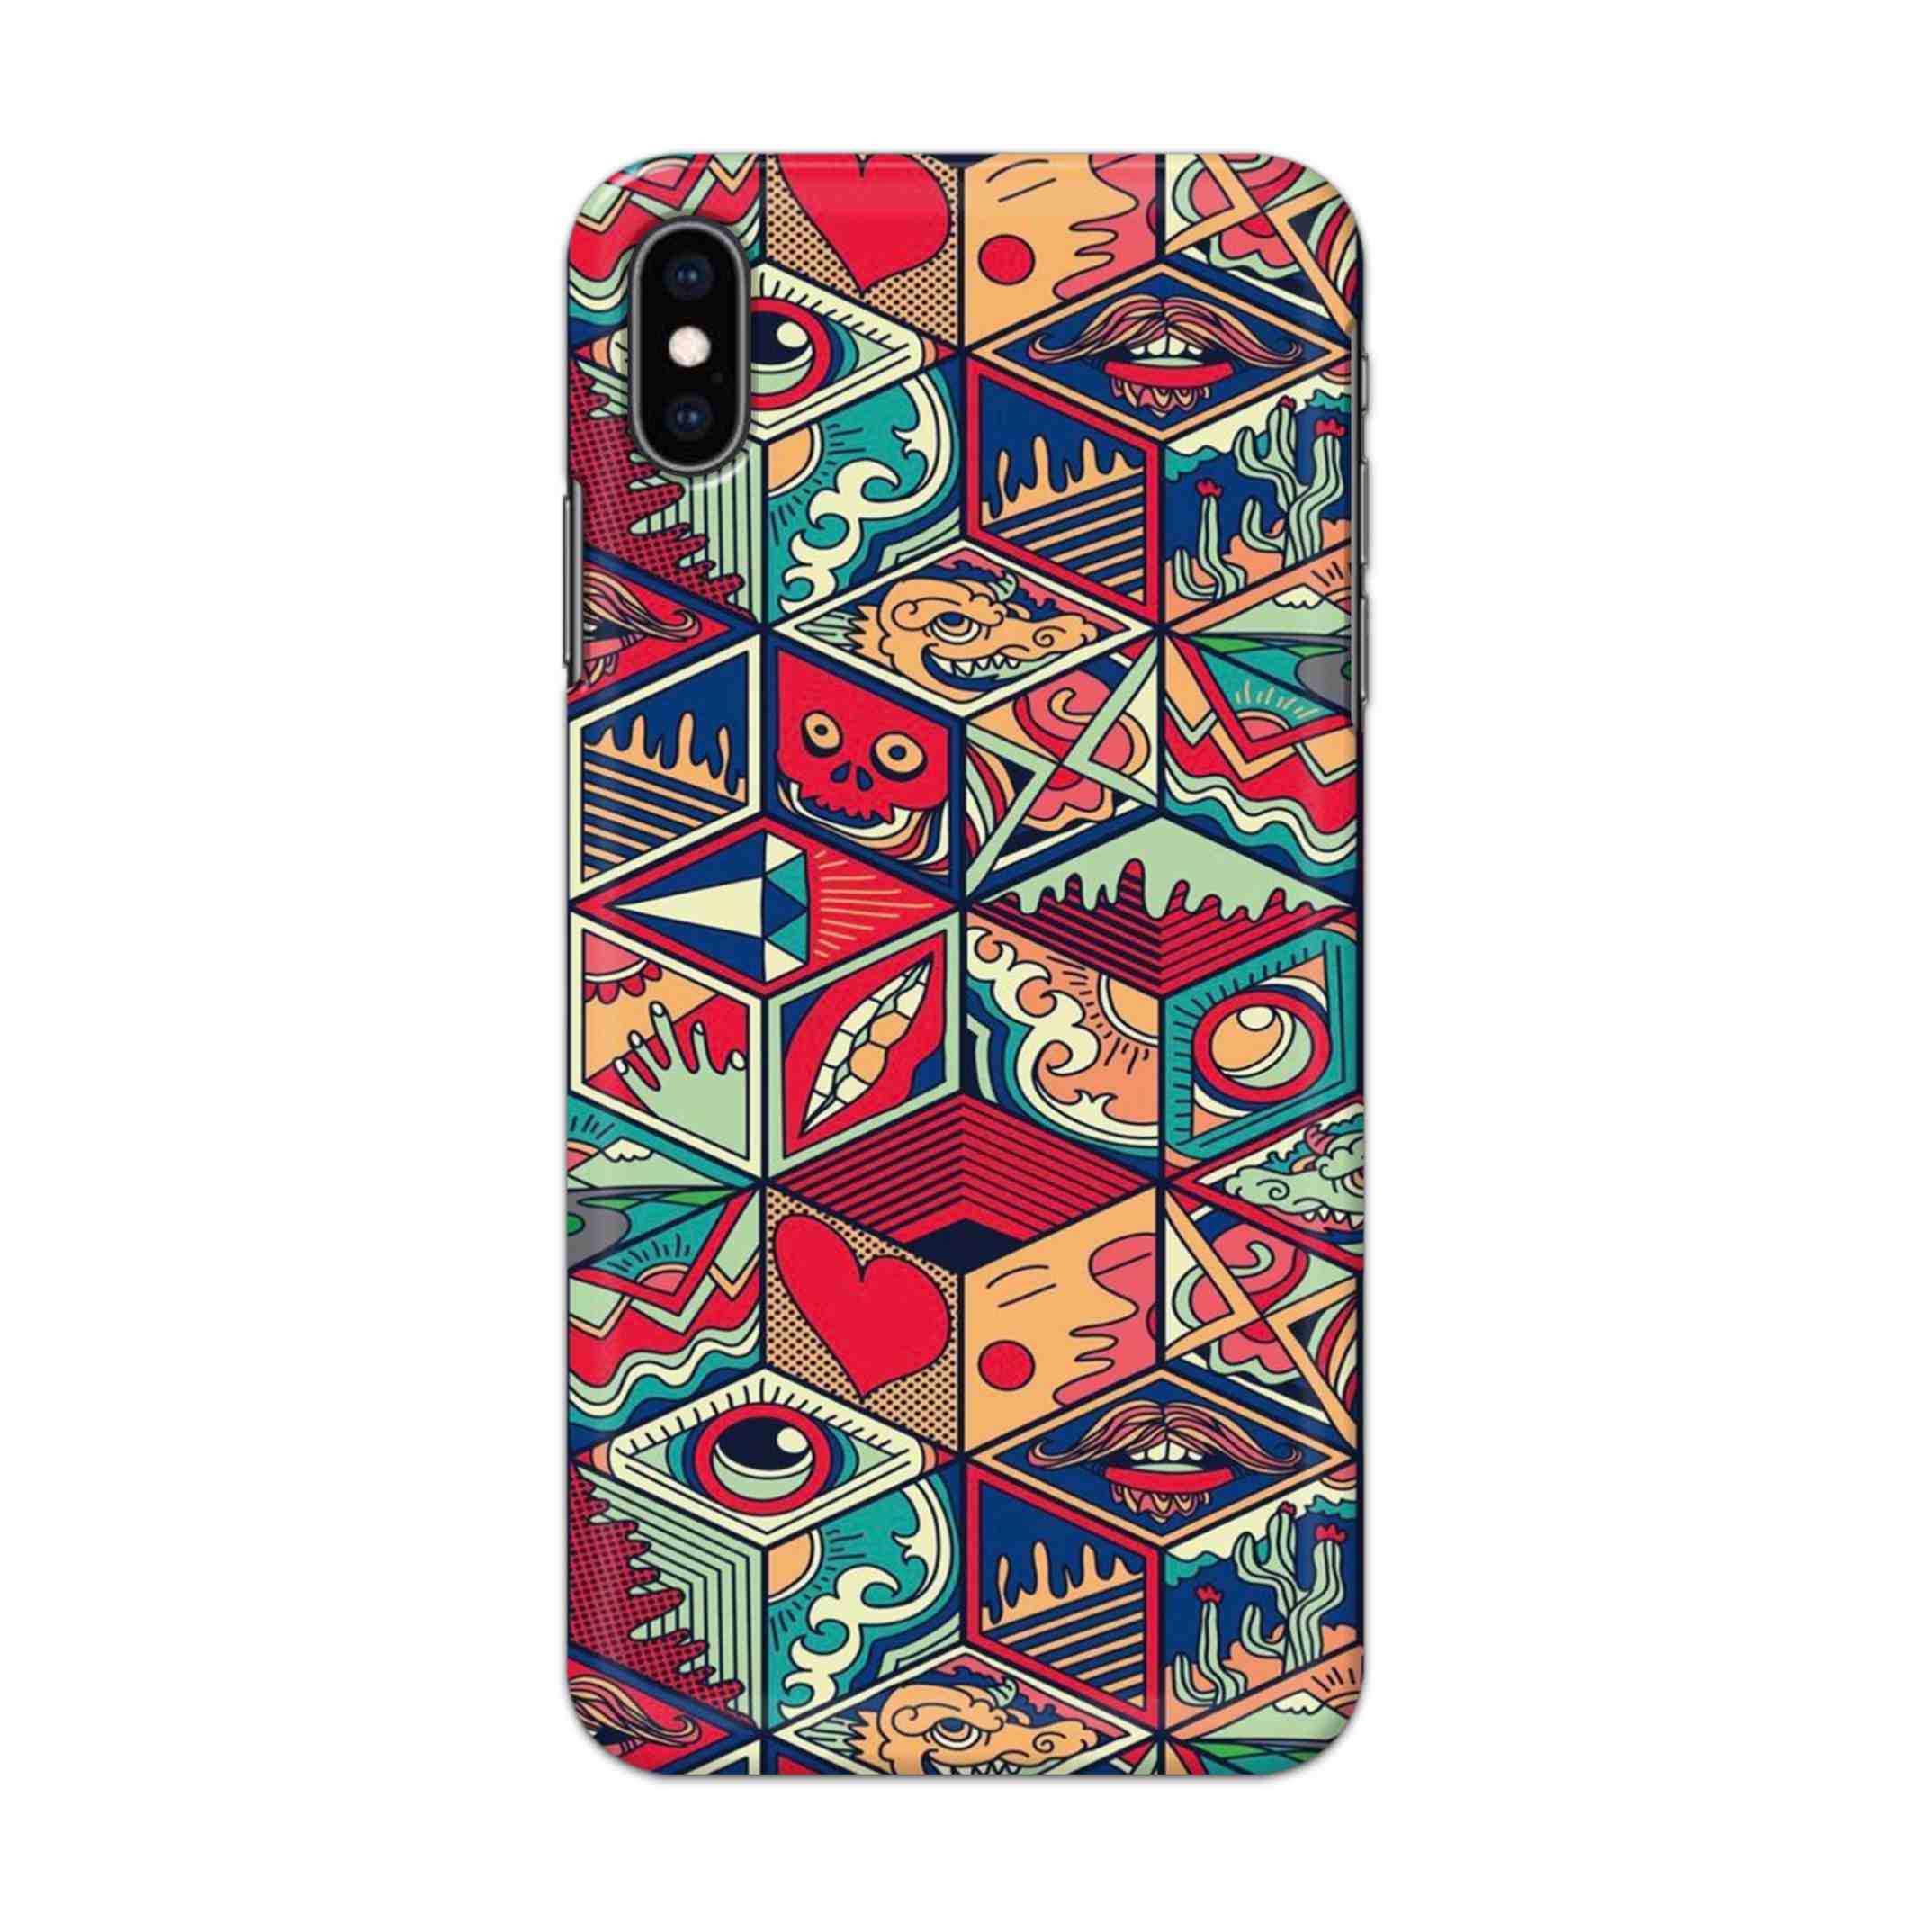 Buy Face Mandala Hard Back Mobile Phone Case/Cover For iPhone XS MAX Online